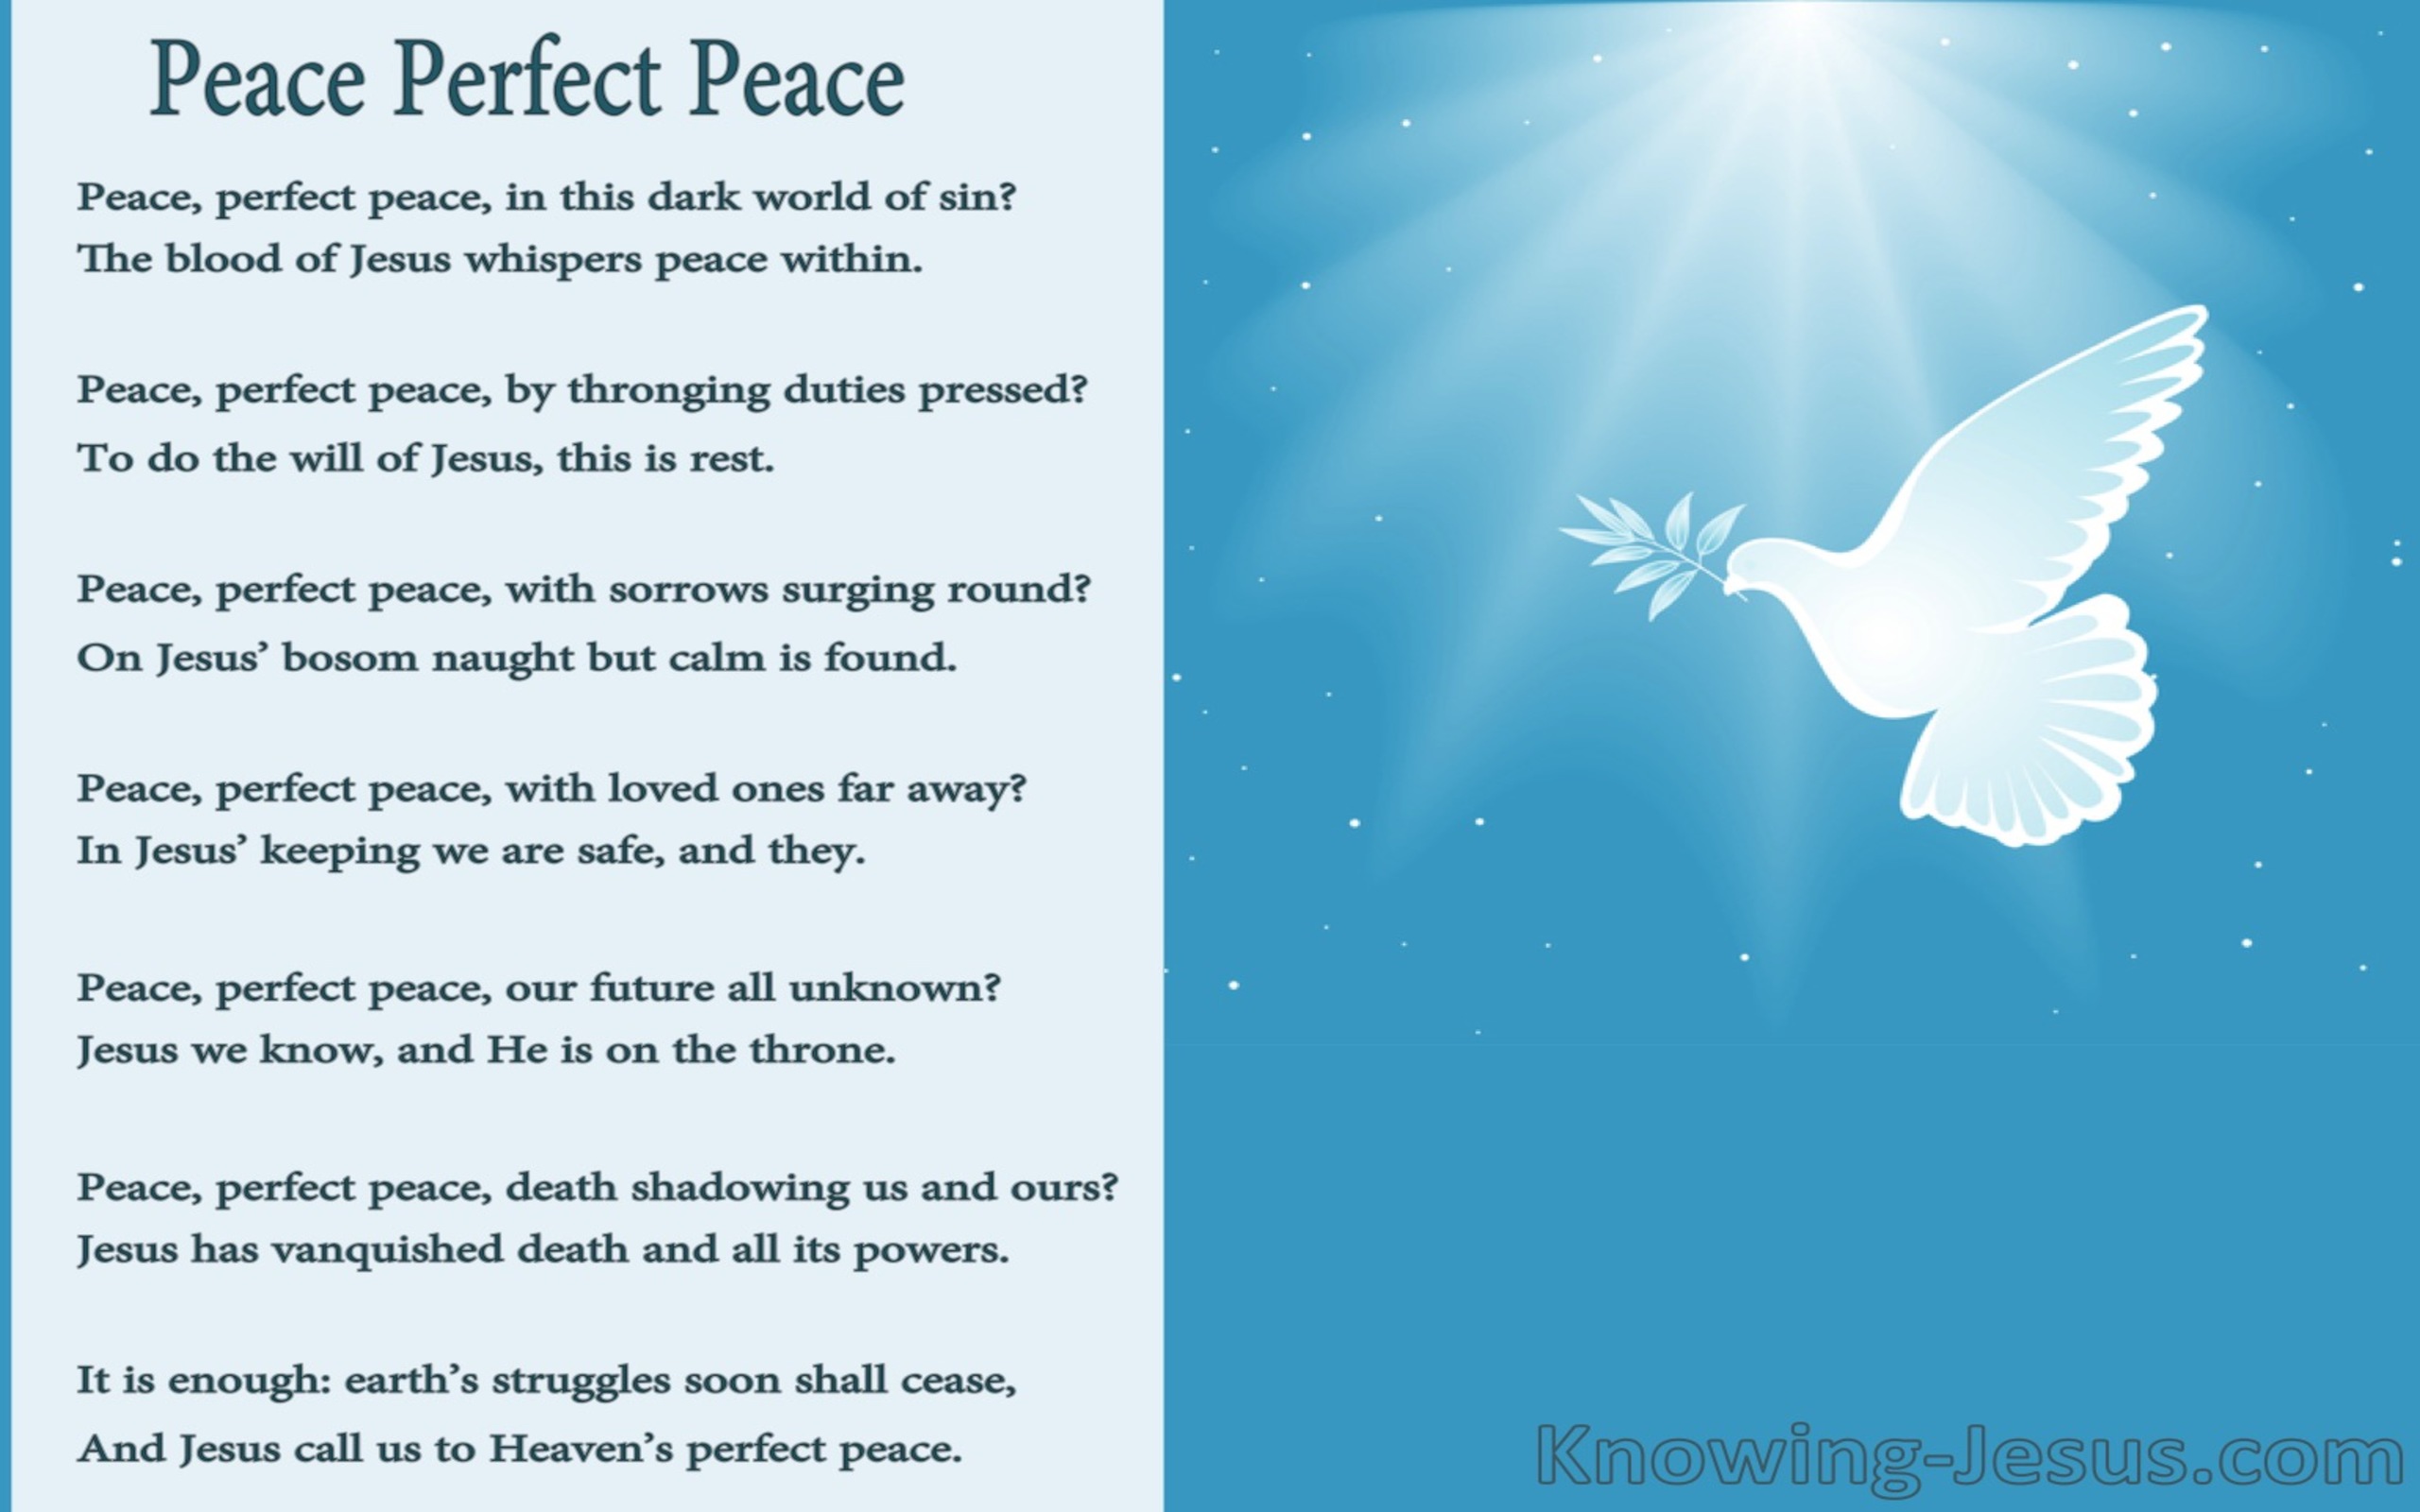 Be A Blessing, Be A Peacemaker (devotional)03-15 (blue) - poem